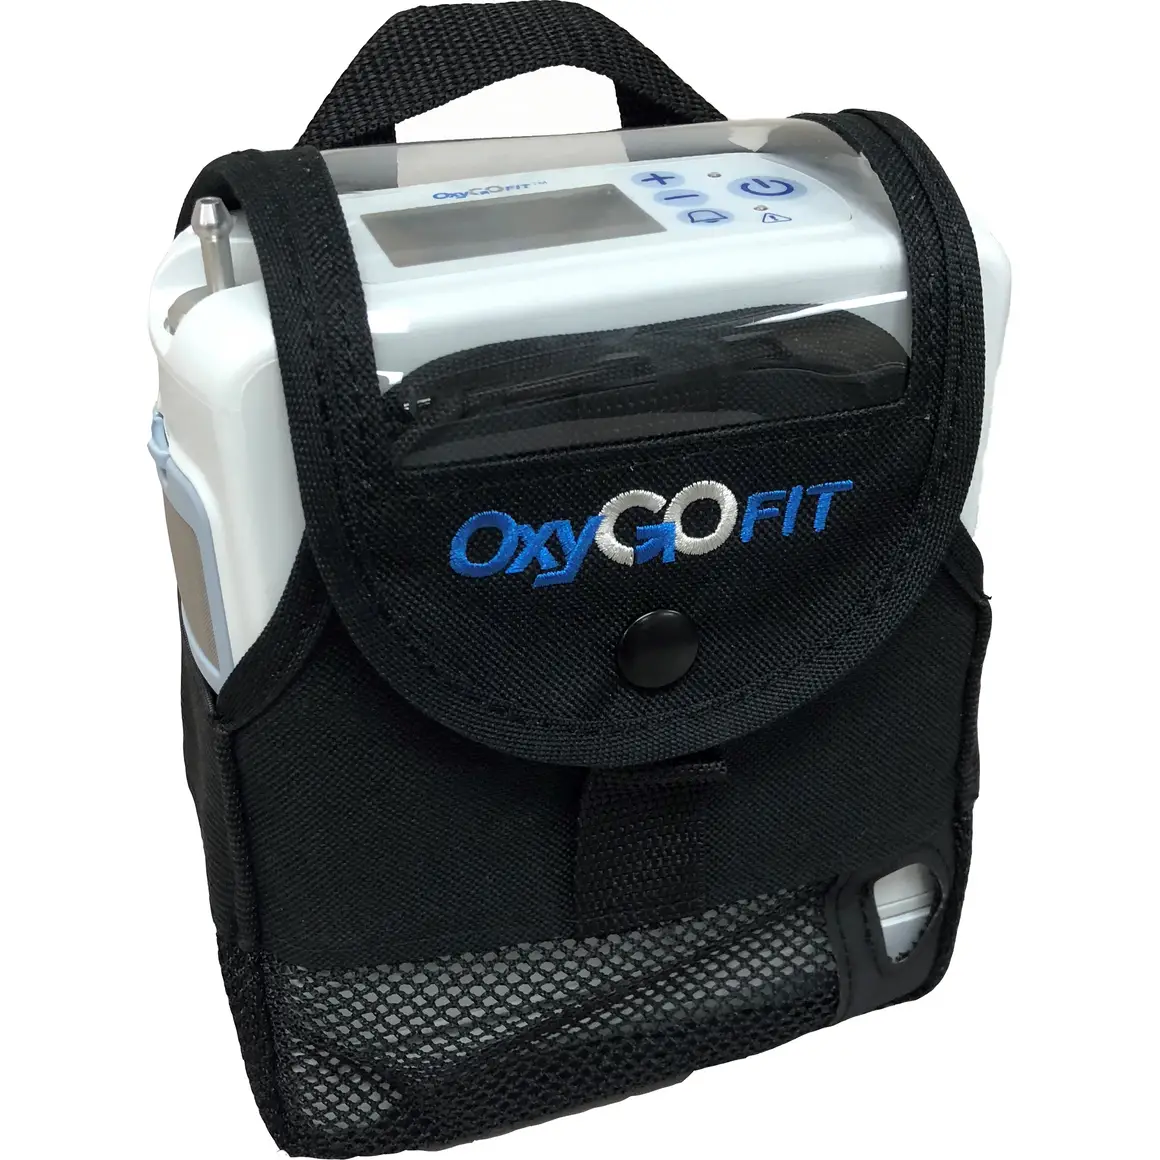 OxyGo Fit Protective Bag â Medical Equipment Specialists